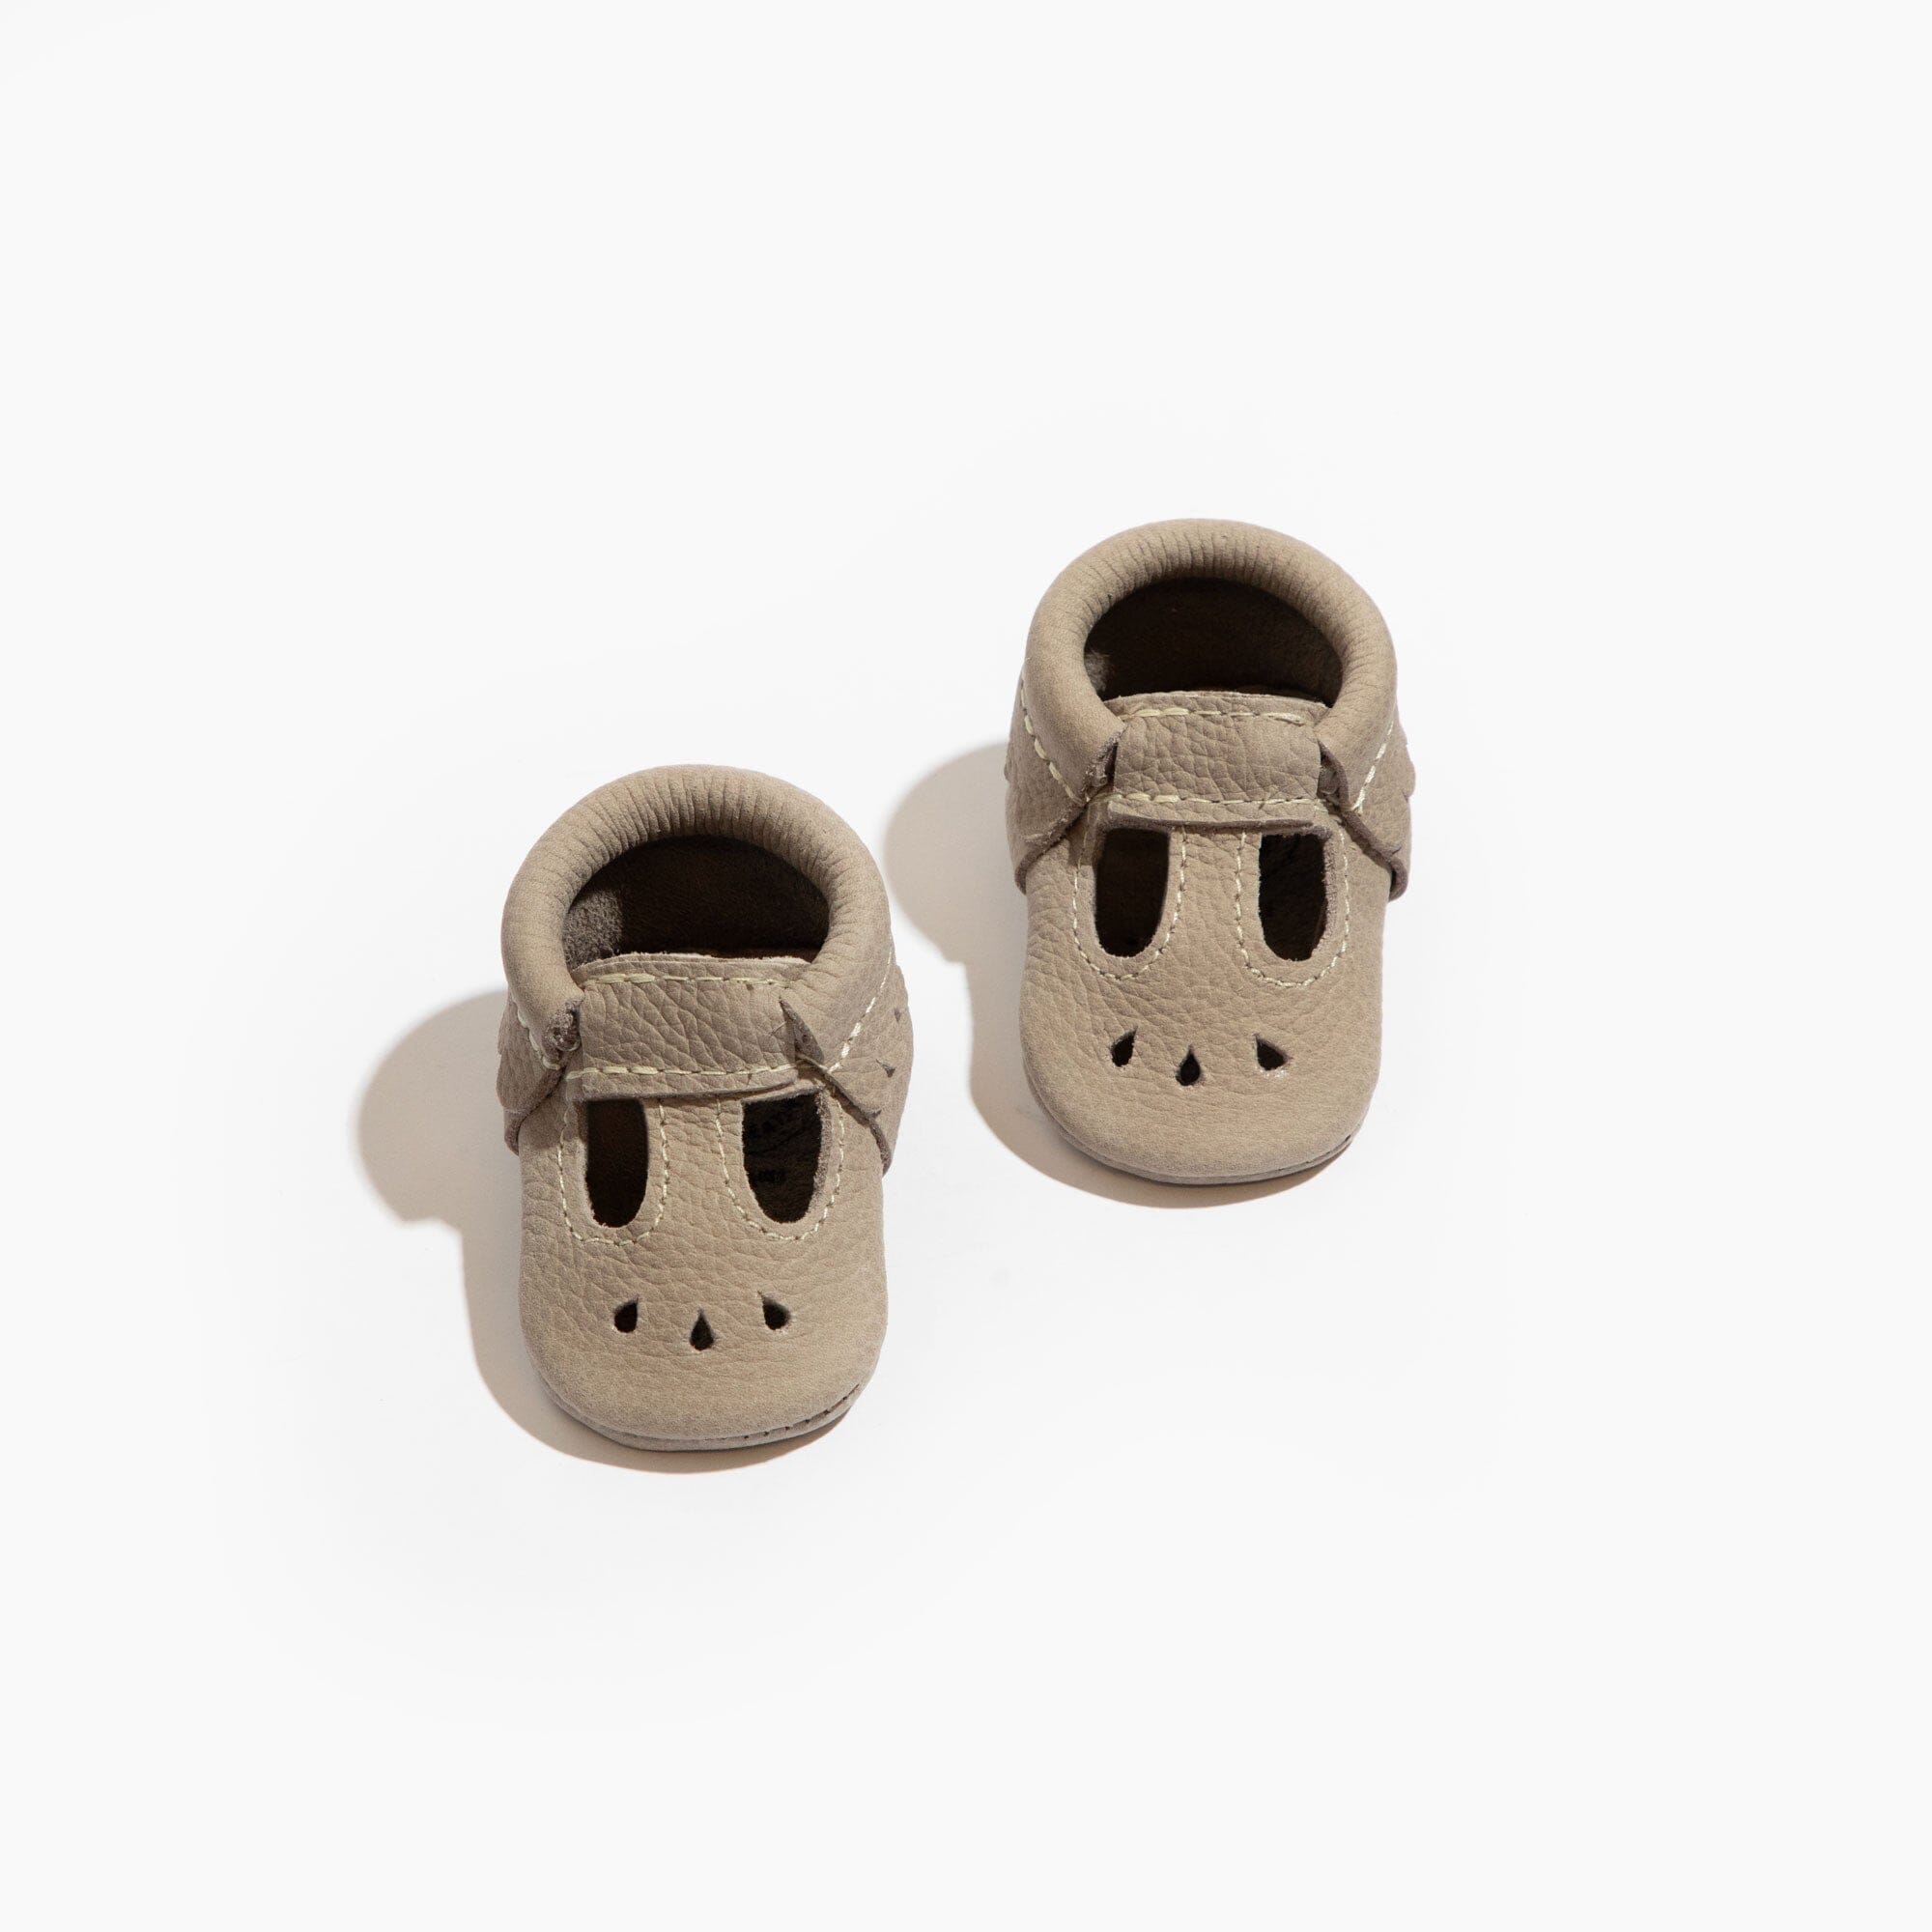 Personalised Newborn Baby Shoes with Name and Animal | giftsbespoke.com